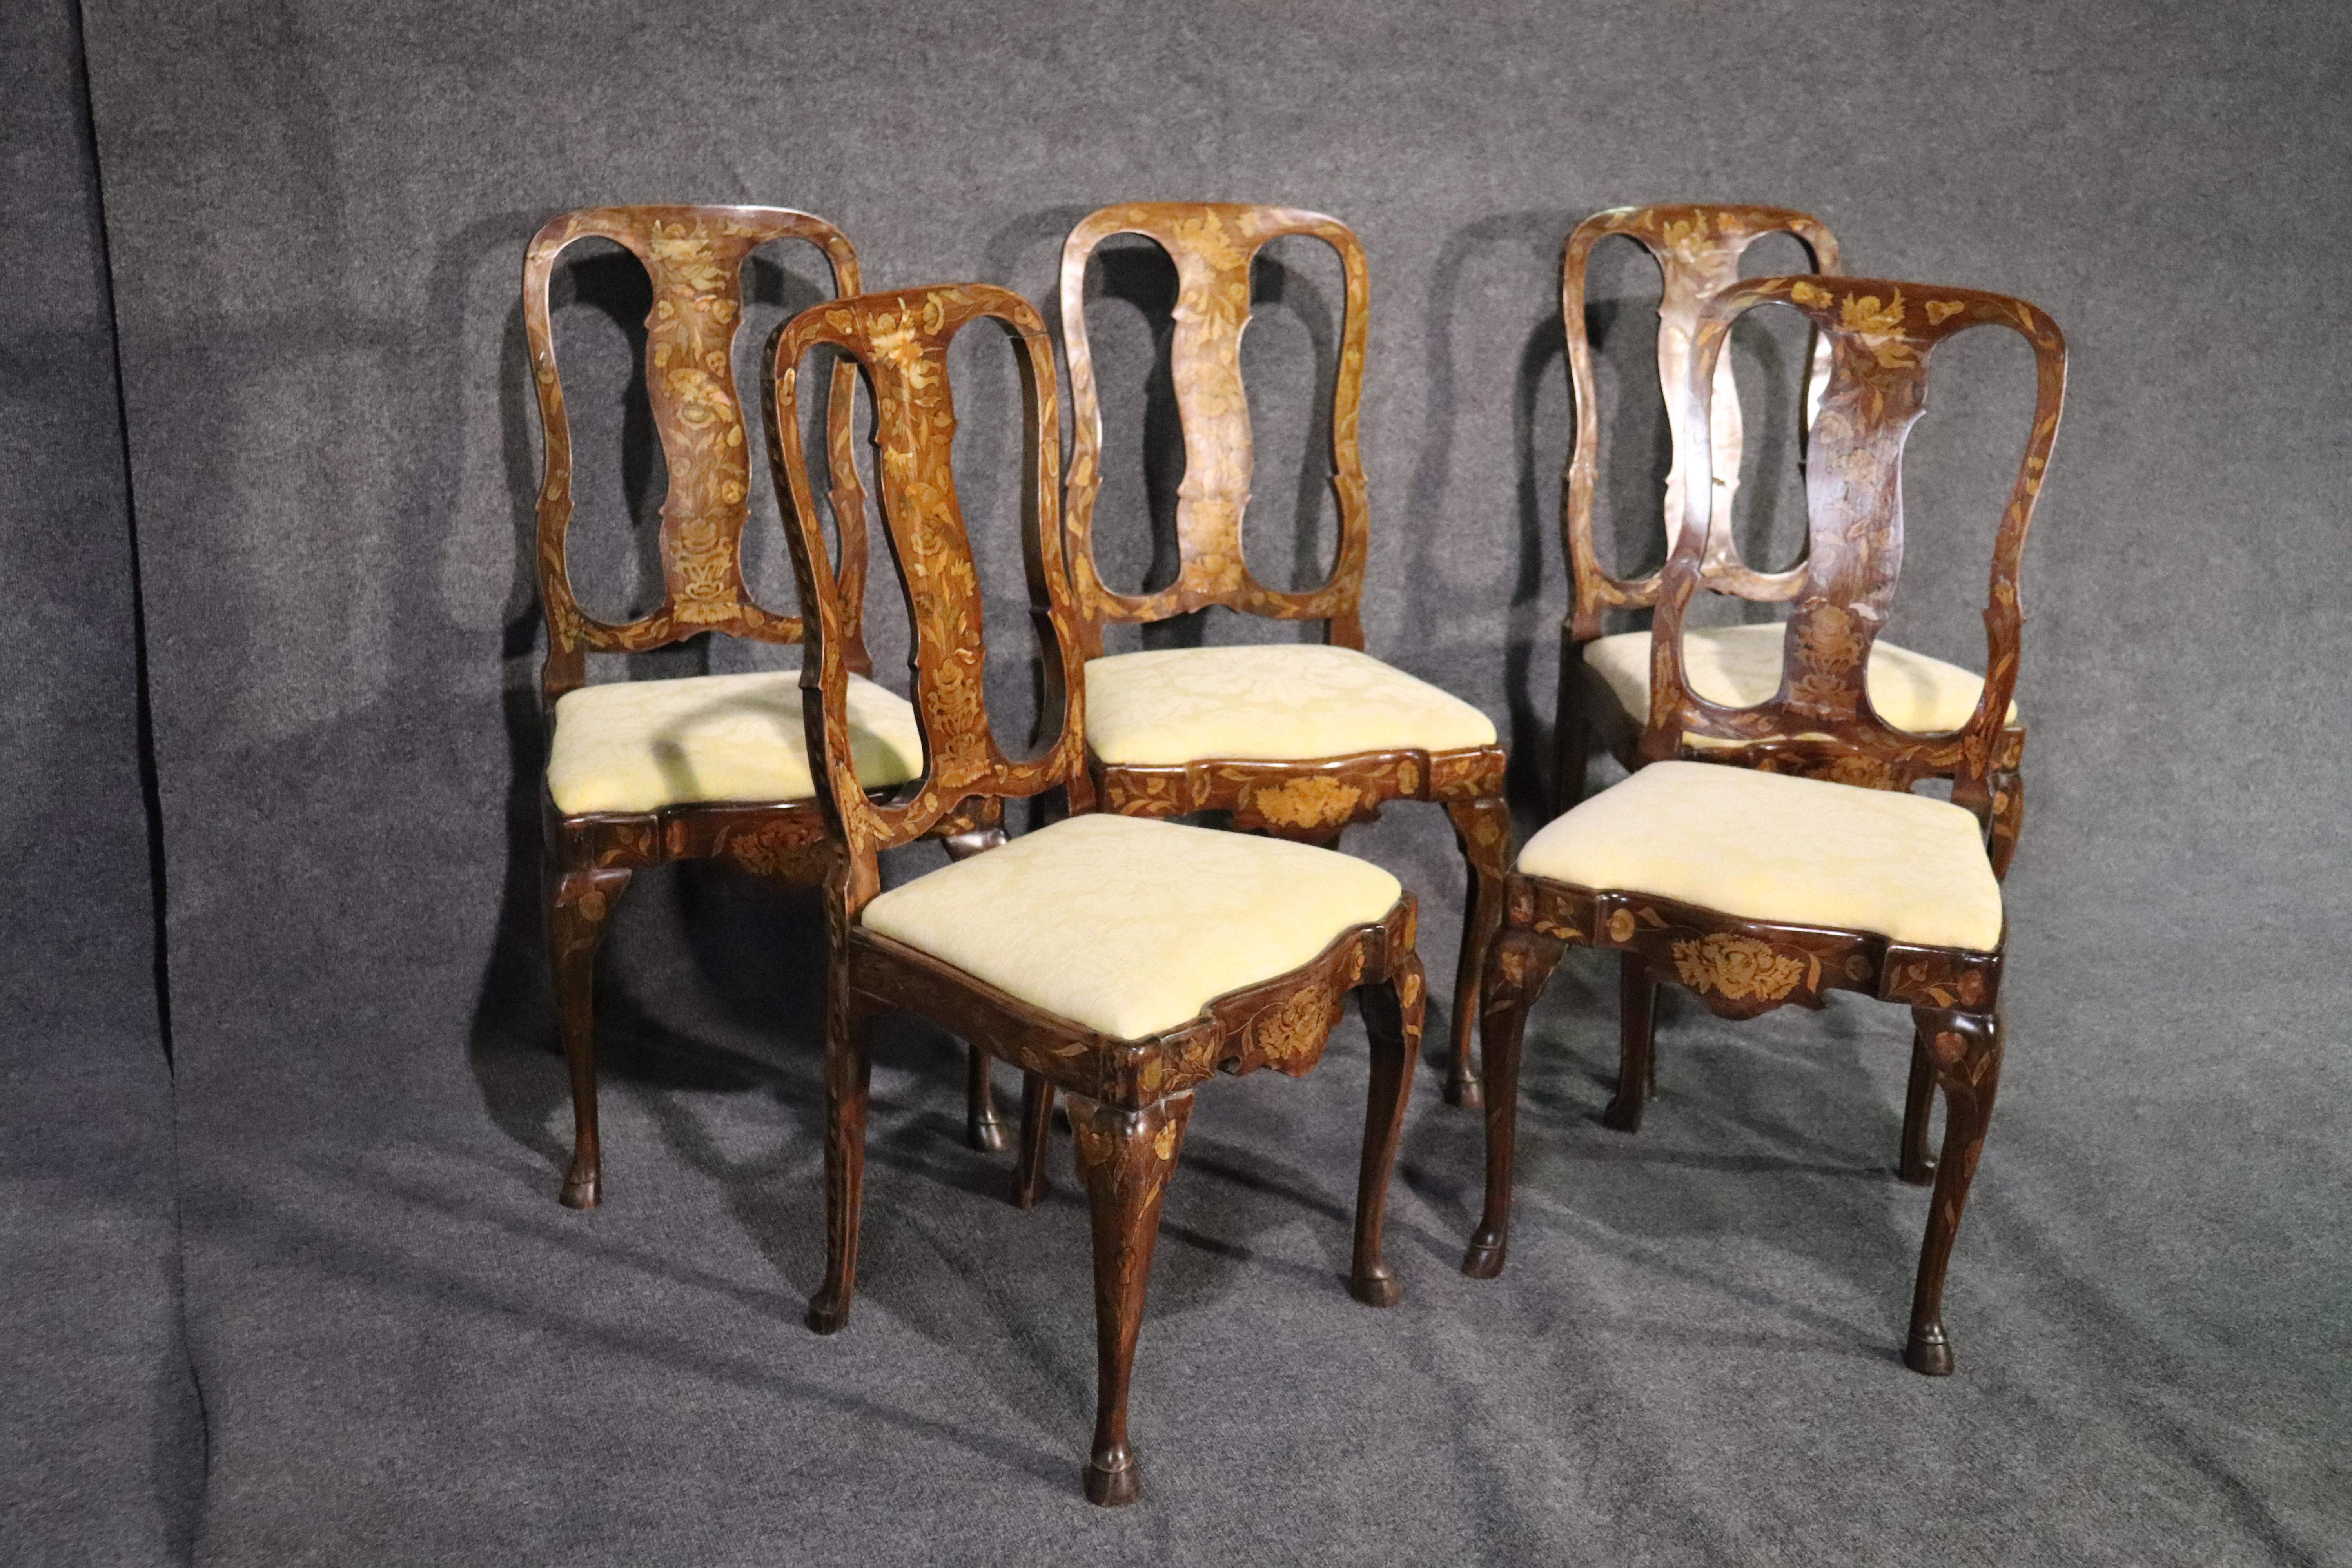 This is a rare and unique set of Dutch-made inlaid dining chairs. The chairs are from the 1890s era and will show small losses of inlay here and there but are essentially in good condition and have clean upholstery. The cushions are drop in cushions